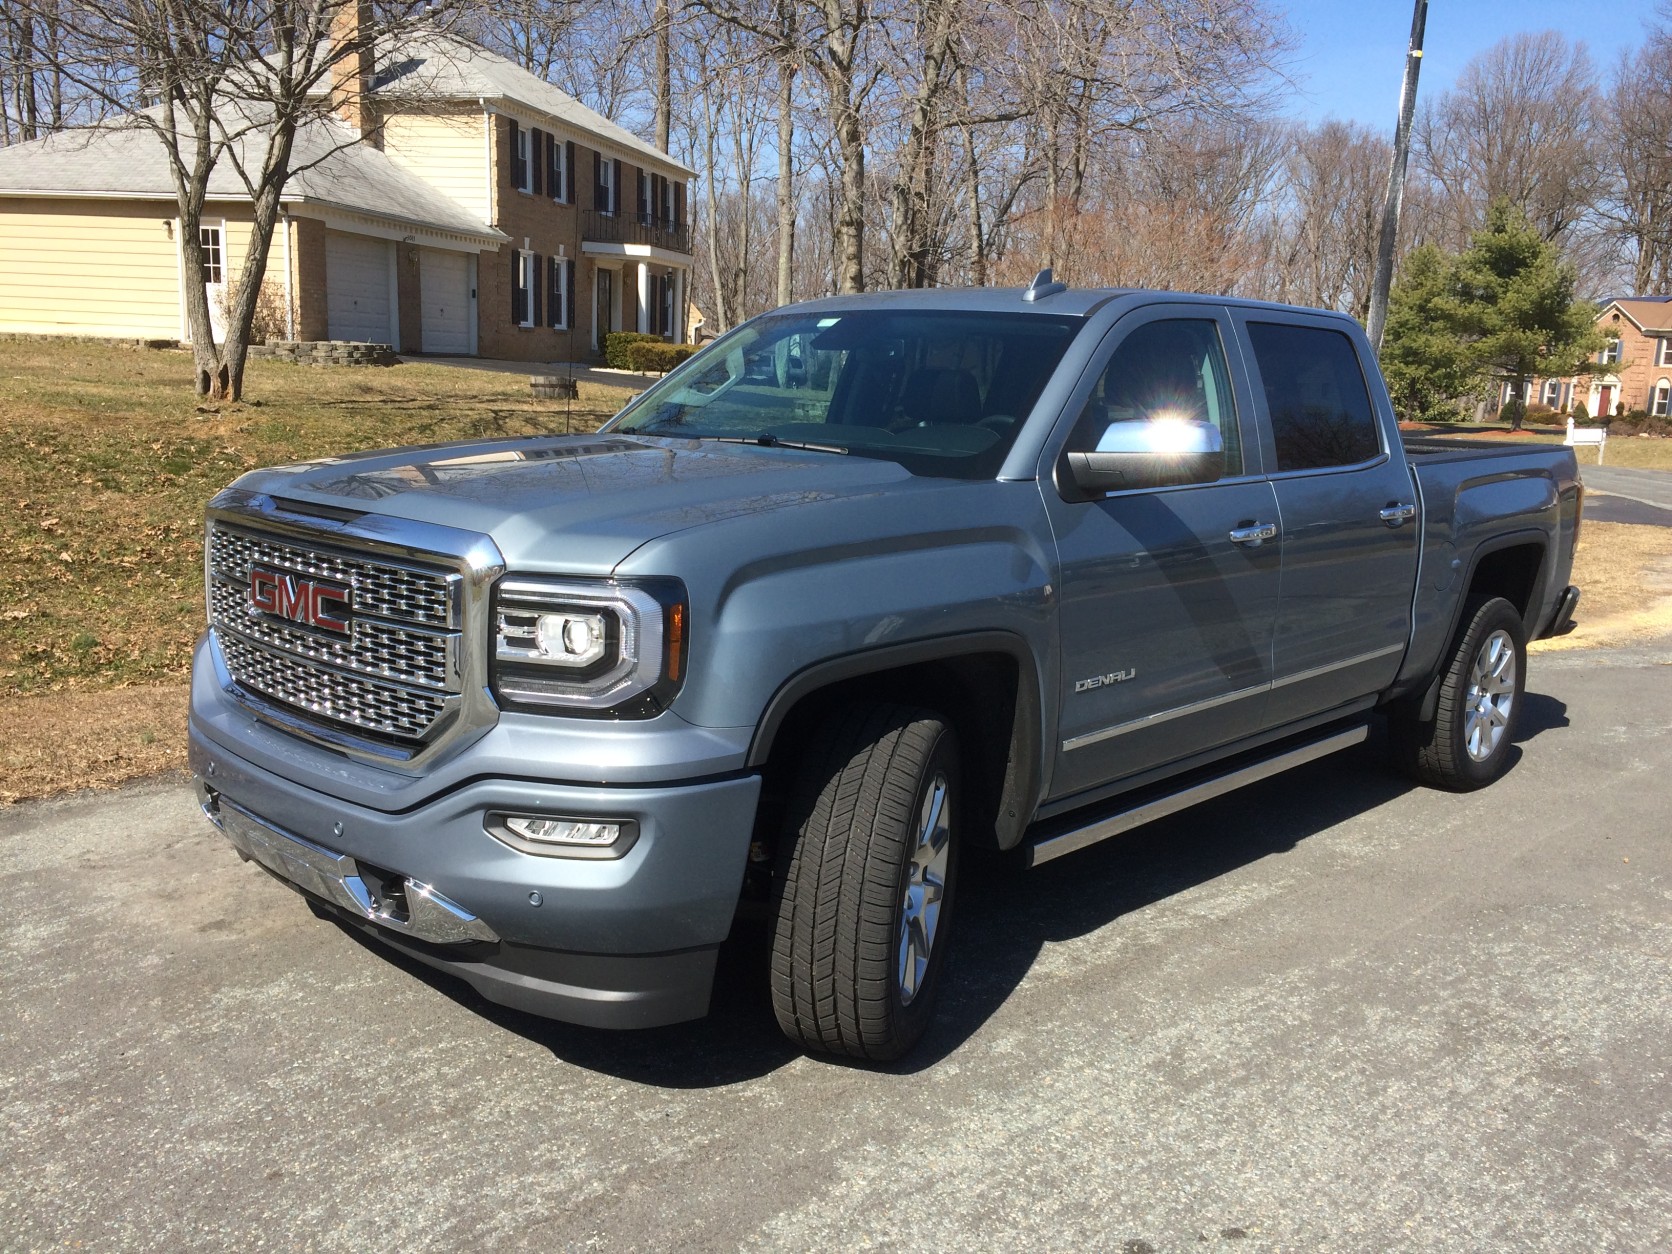 The 2016 Sierra Denali is a high-end truck that can tow over 11,000lbs and do it with the comfort of a luxury car. (WTOP/Mike Parris)